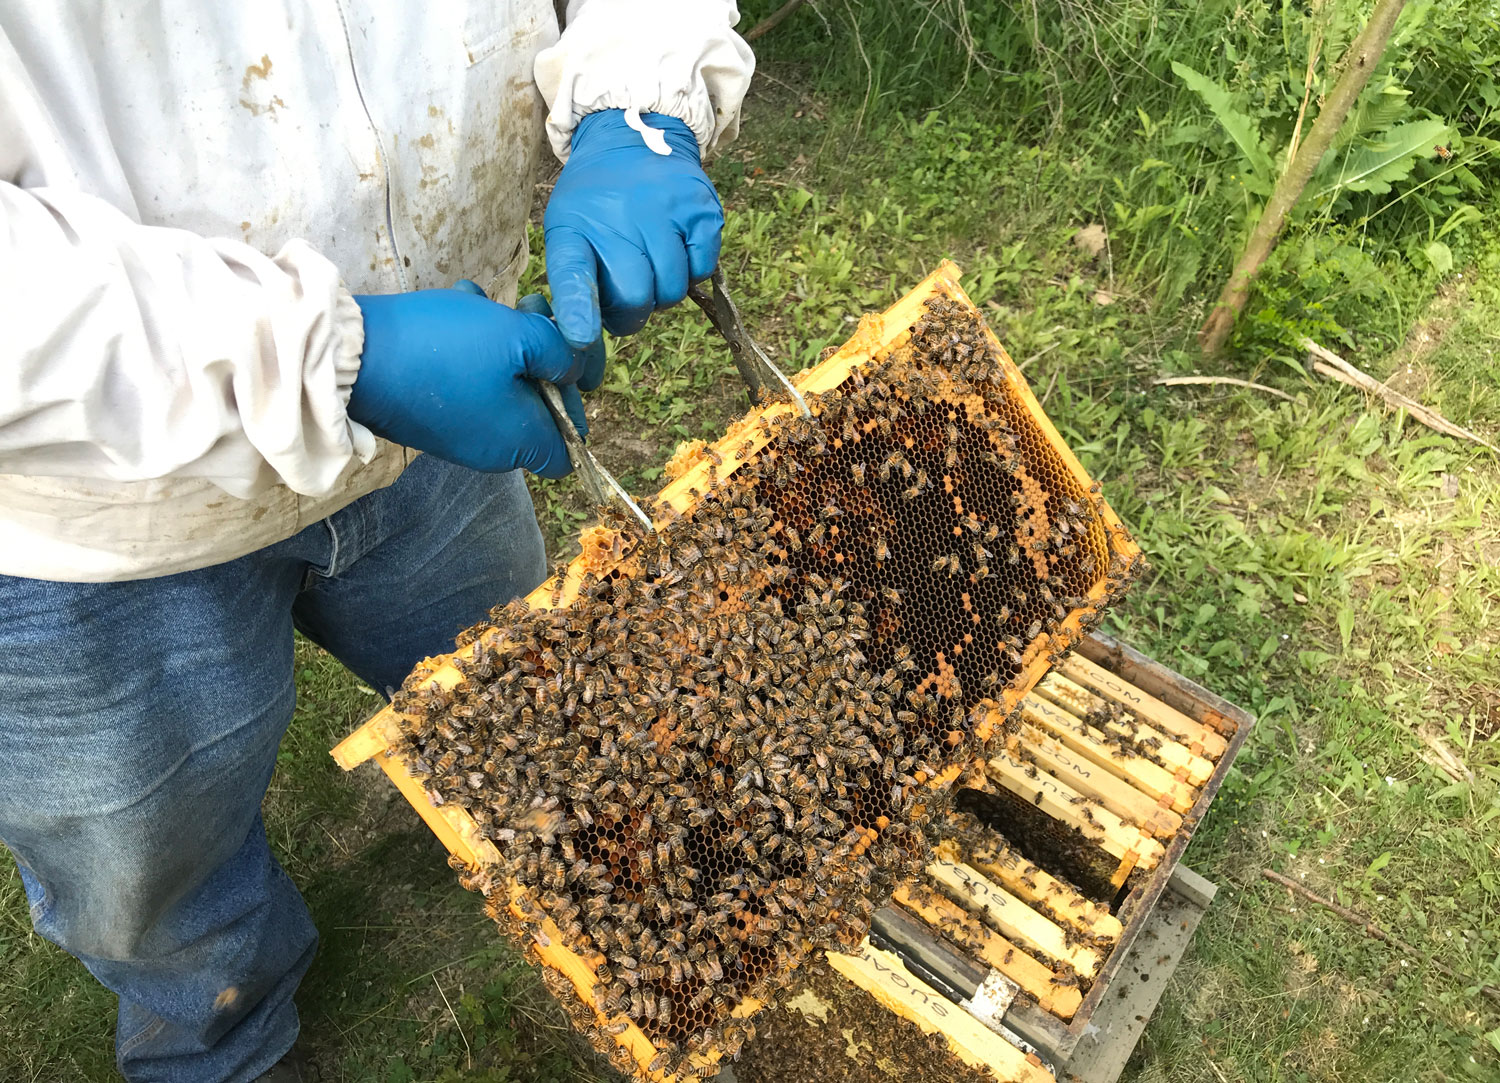 A beekeeper holding a frame from a hive.